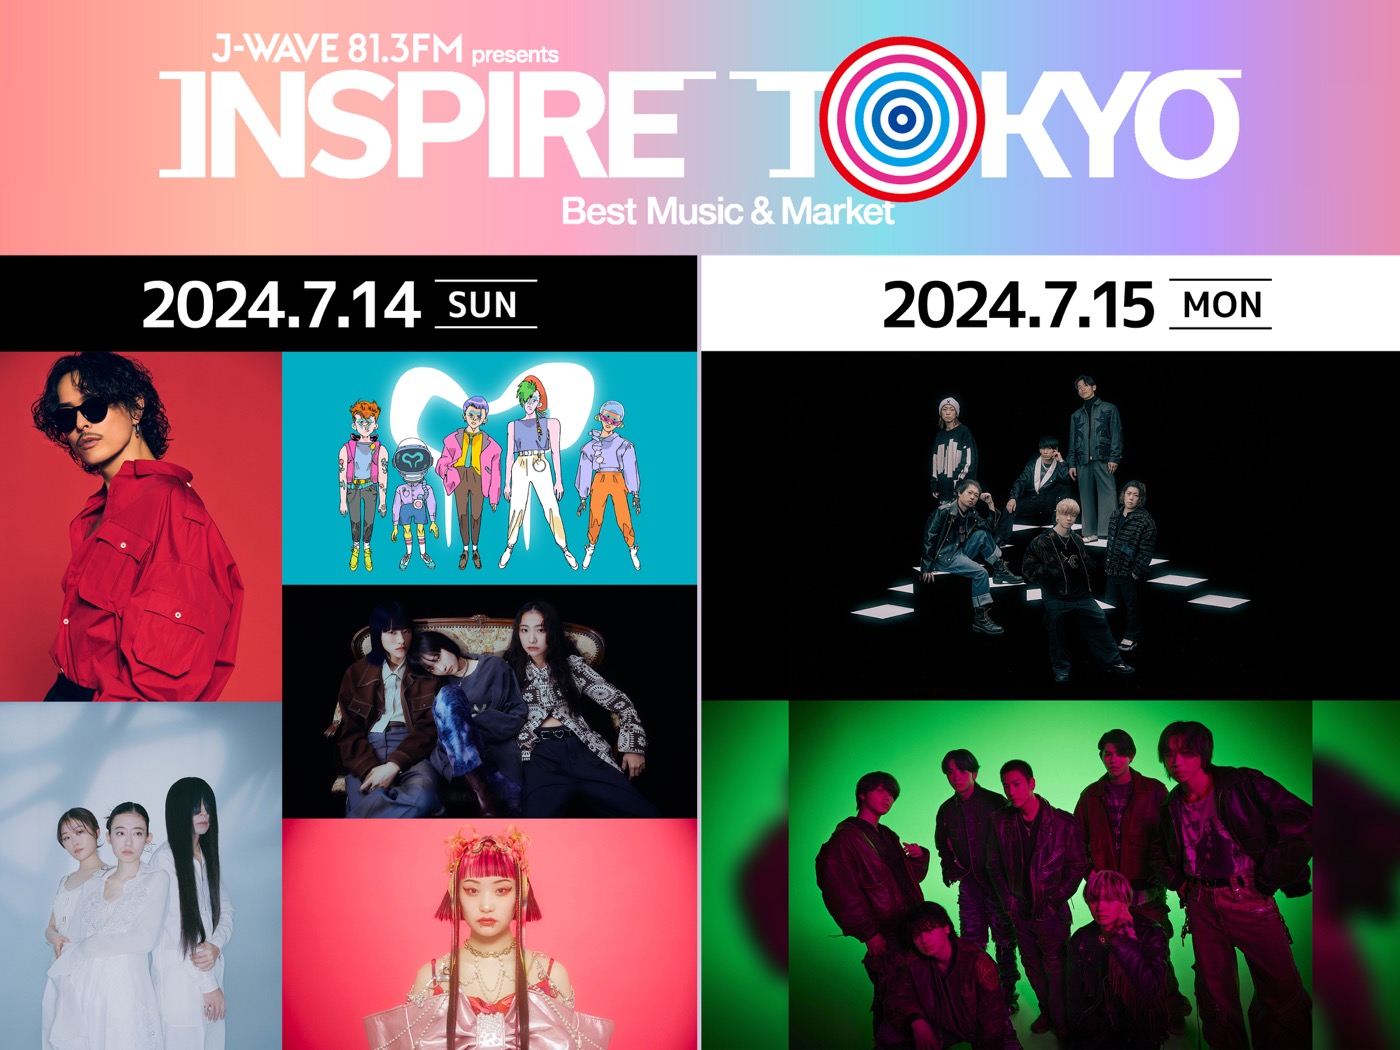 UVERworld×BE:FIRSTのツーマンが実現！都市フェス『INSPIRE TOKYO』第1弾出演者発表 - 画像一覧（8/8）